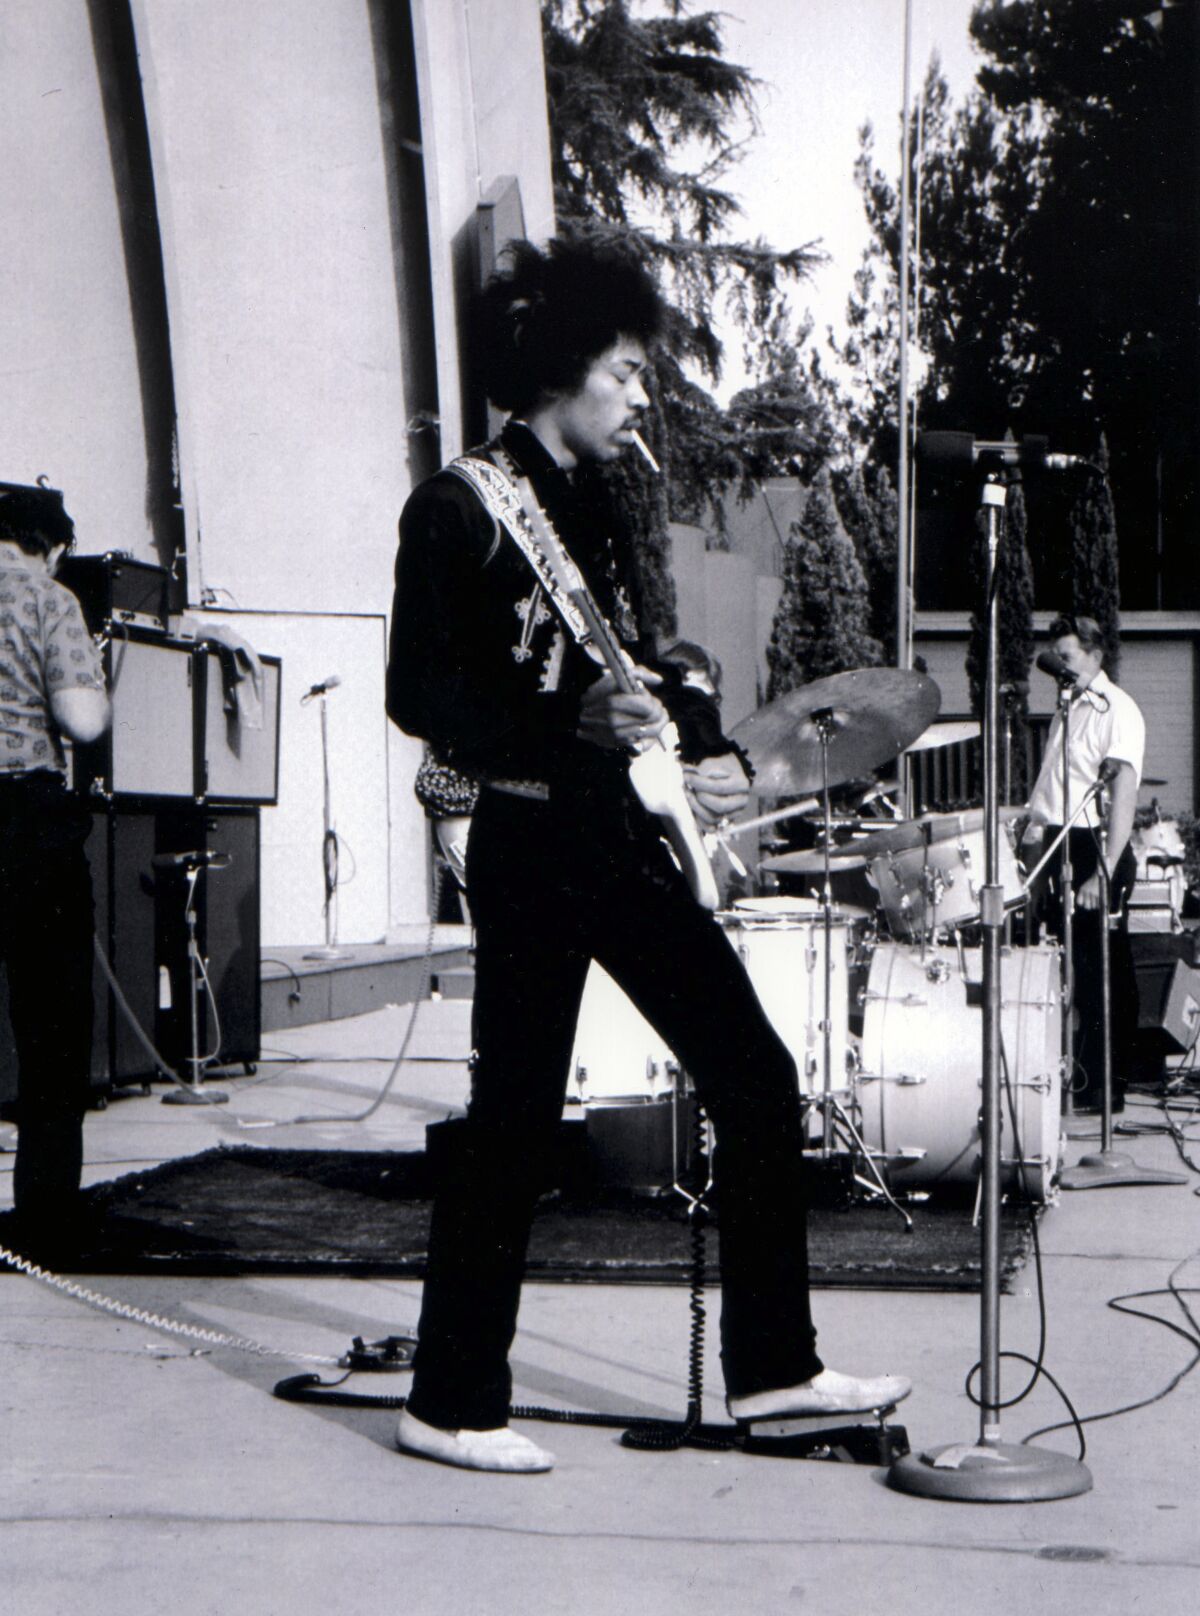 Jimi Hendrix in rehearsal at the Hollywood Bowl